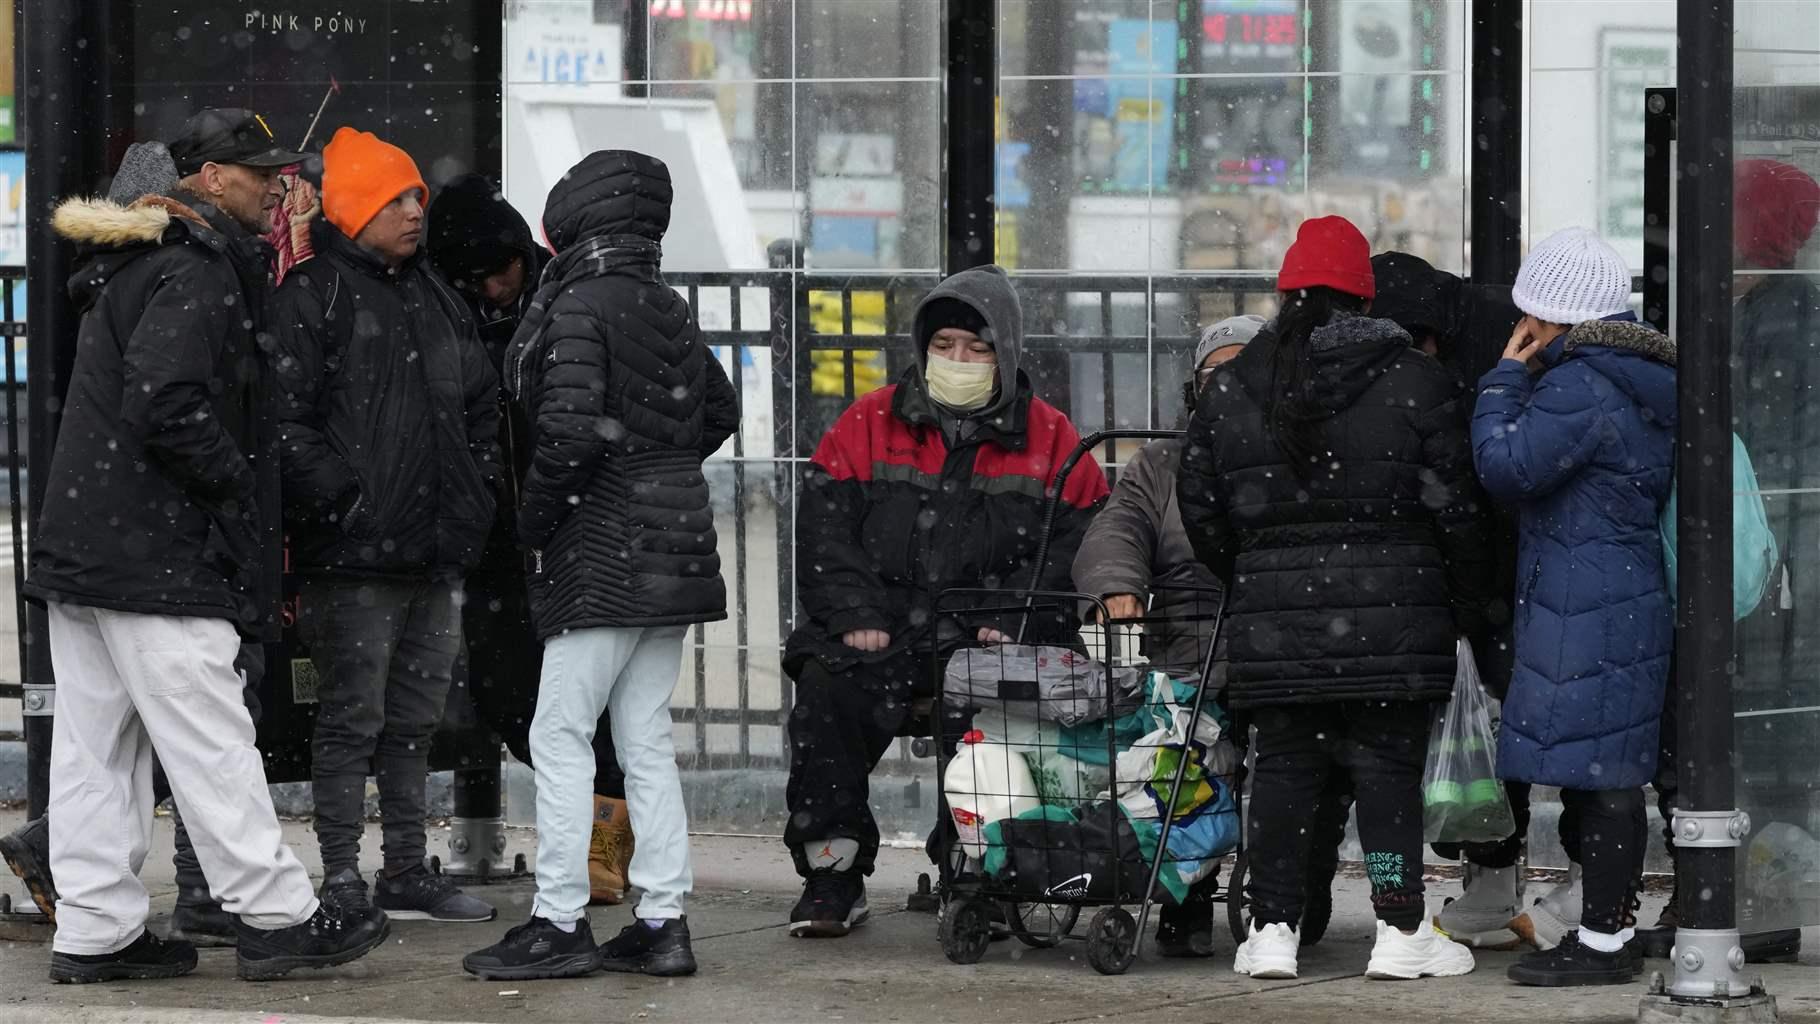 People wait for a bus in Chicago, Thursday, Jan. 5, 2023. (AP Photo/Nam Y. Huh)